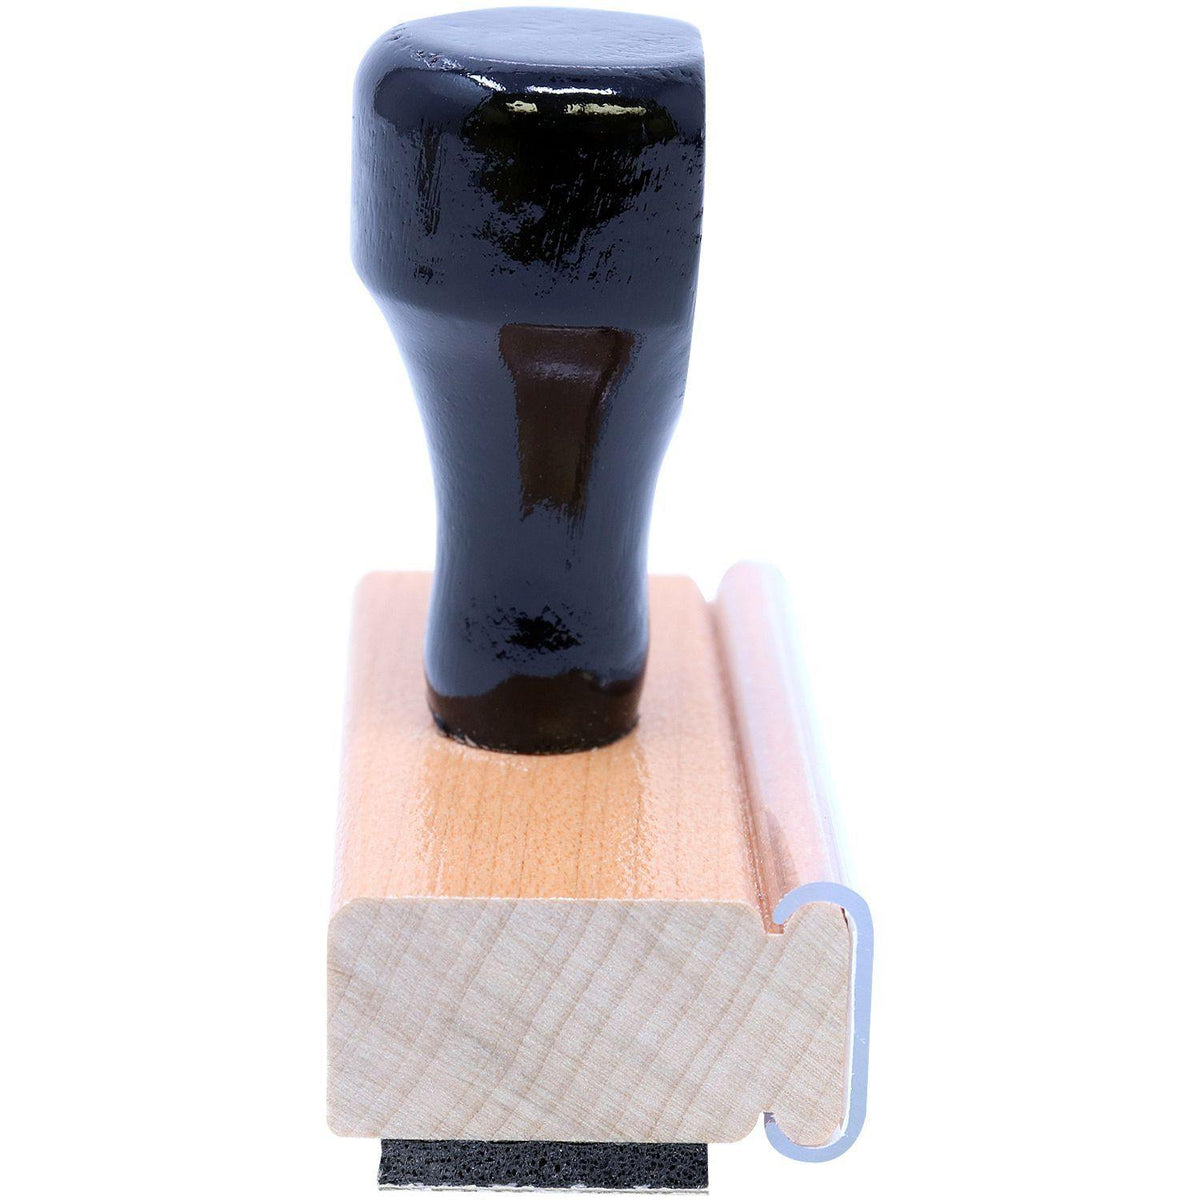 Retained Rubber Stamp - Engineer Seal Stamps - Brand_Acorn, Impression Size_Small, Stamp Type_Regular Stamp, Type of Use_Office